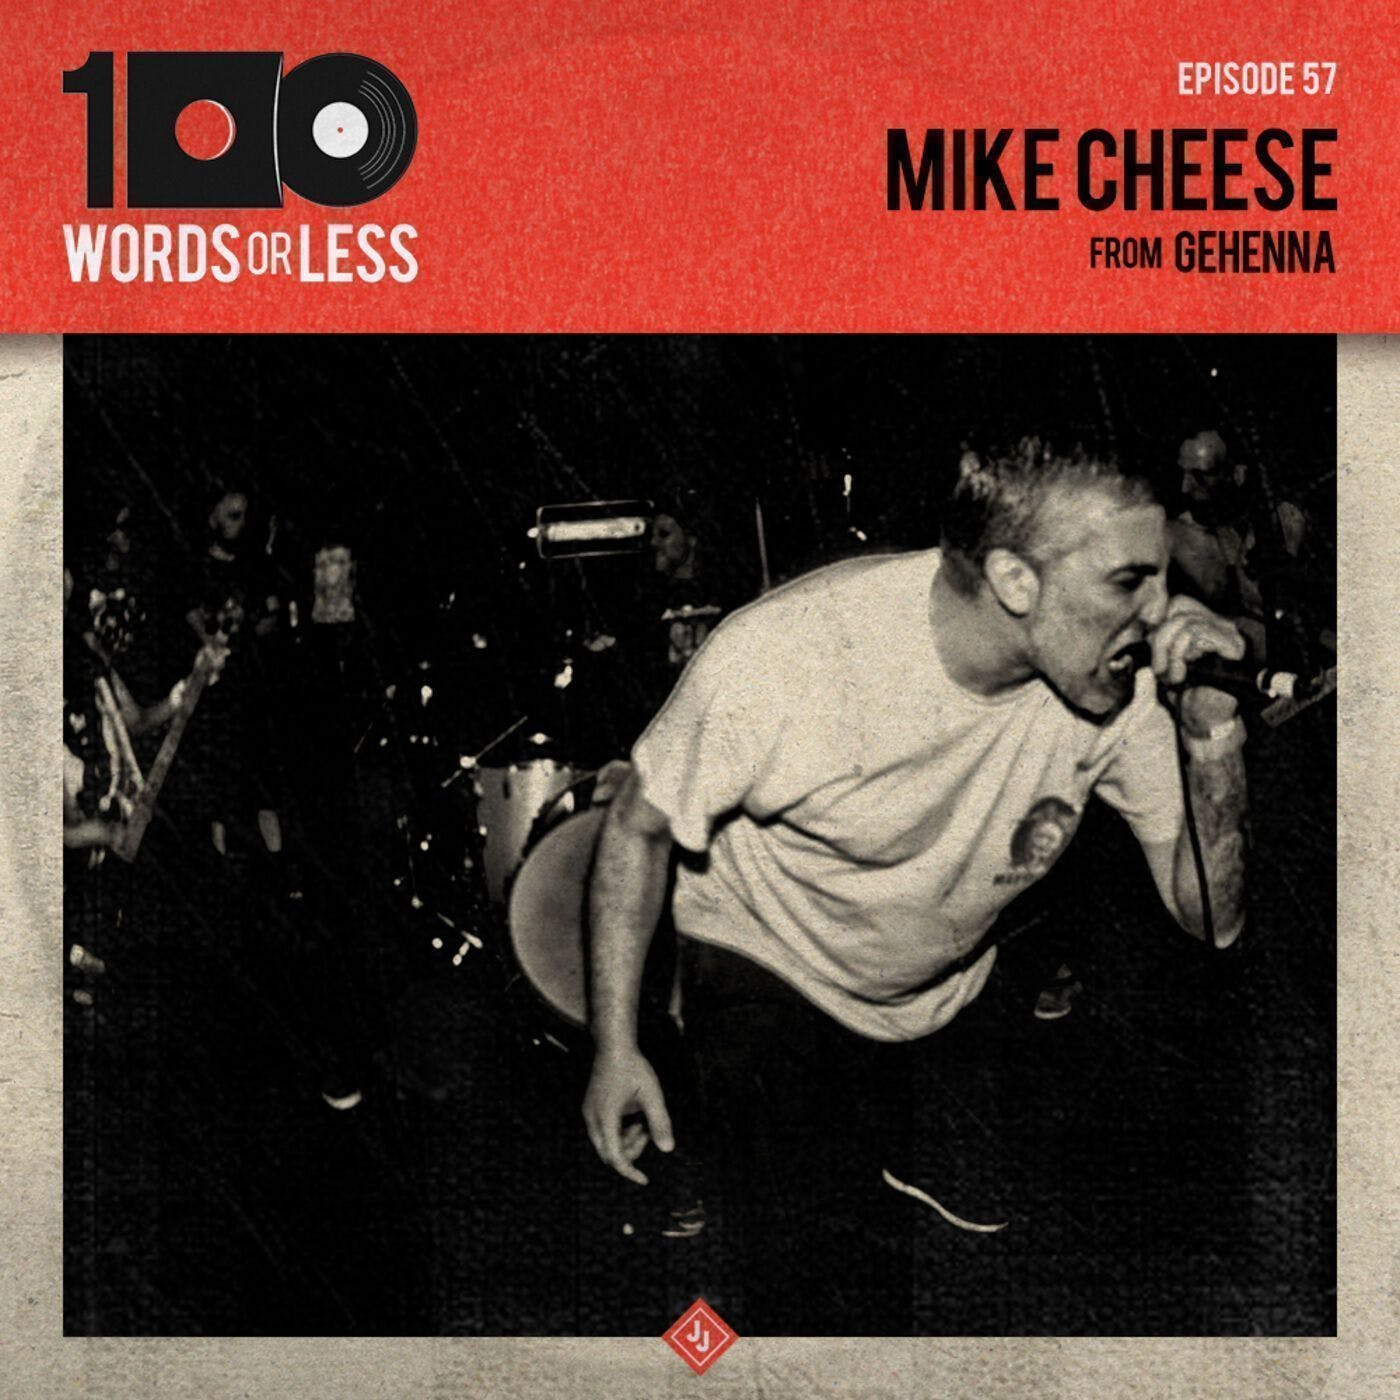 Mike Cheese from Gehenna